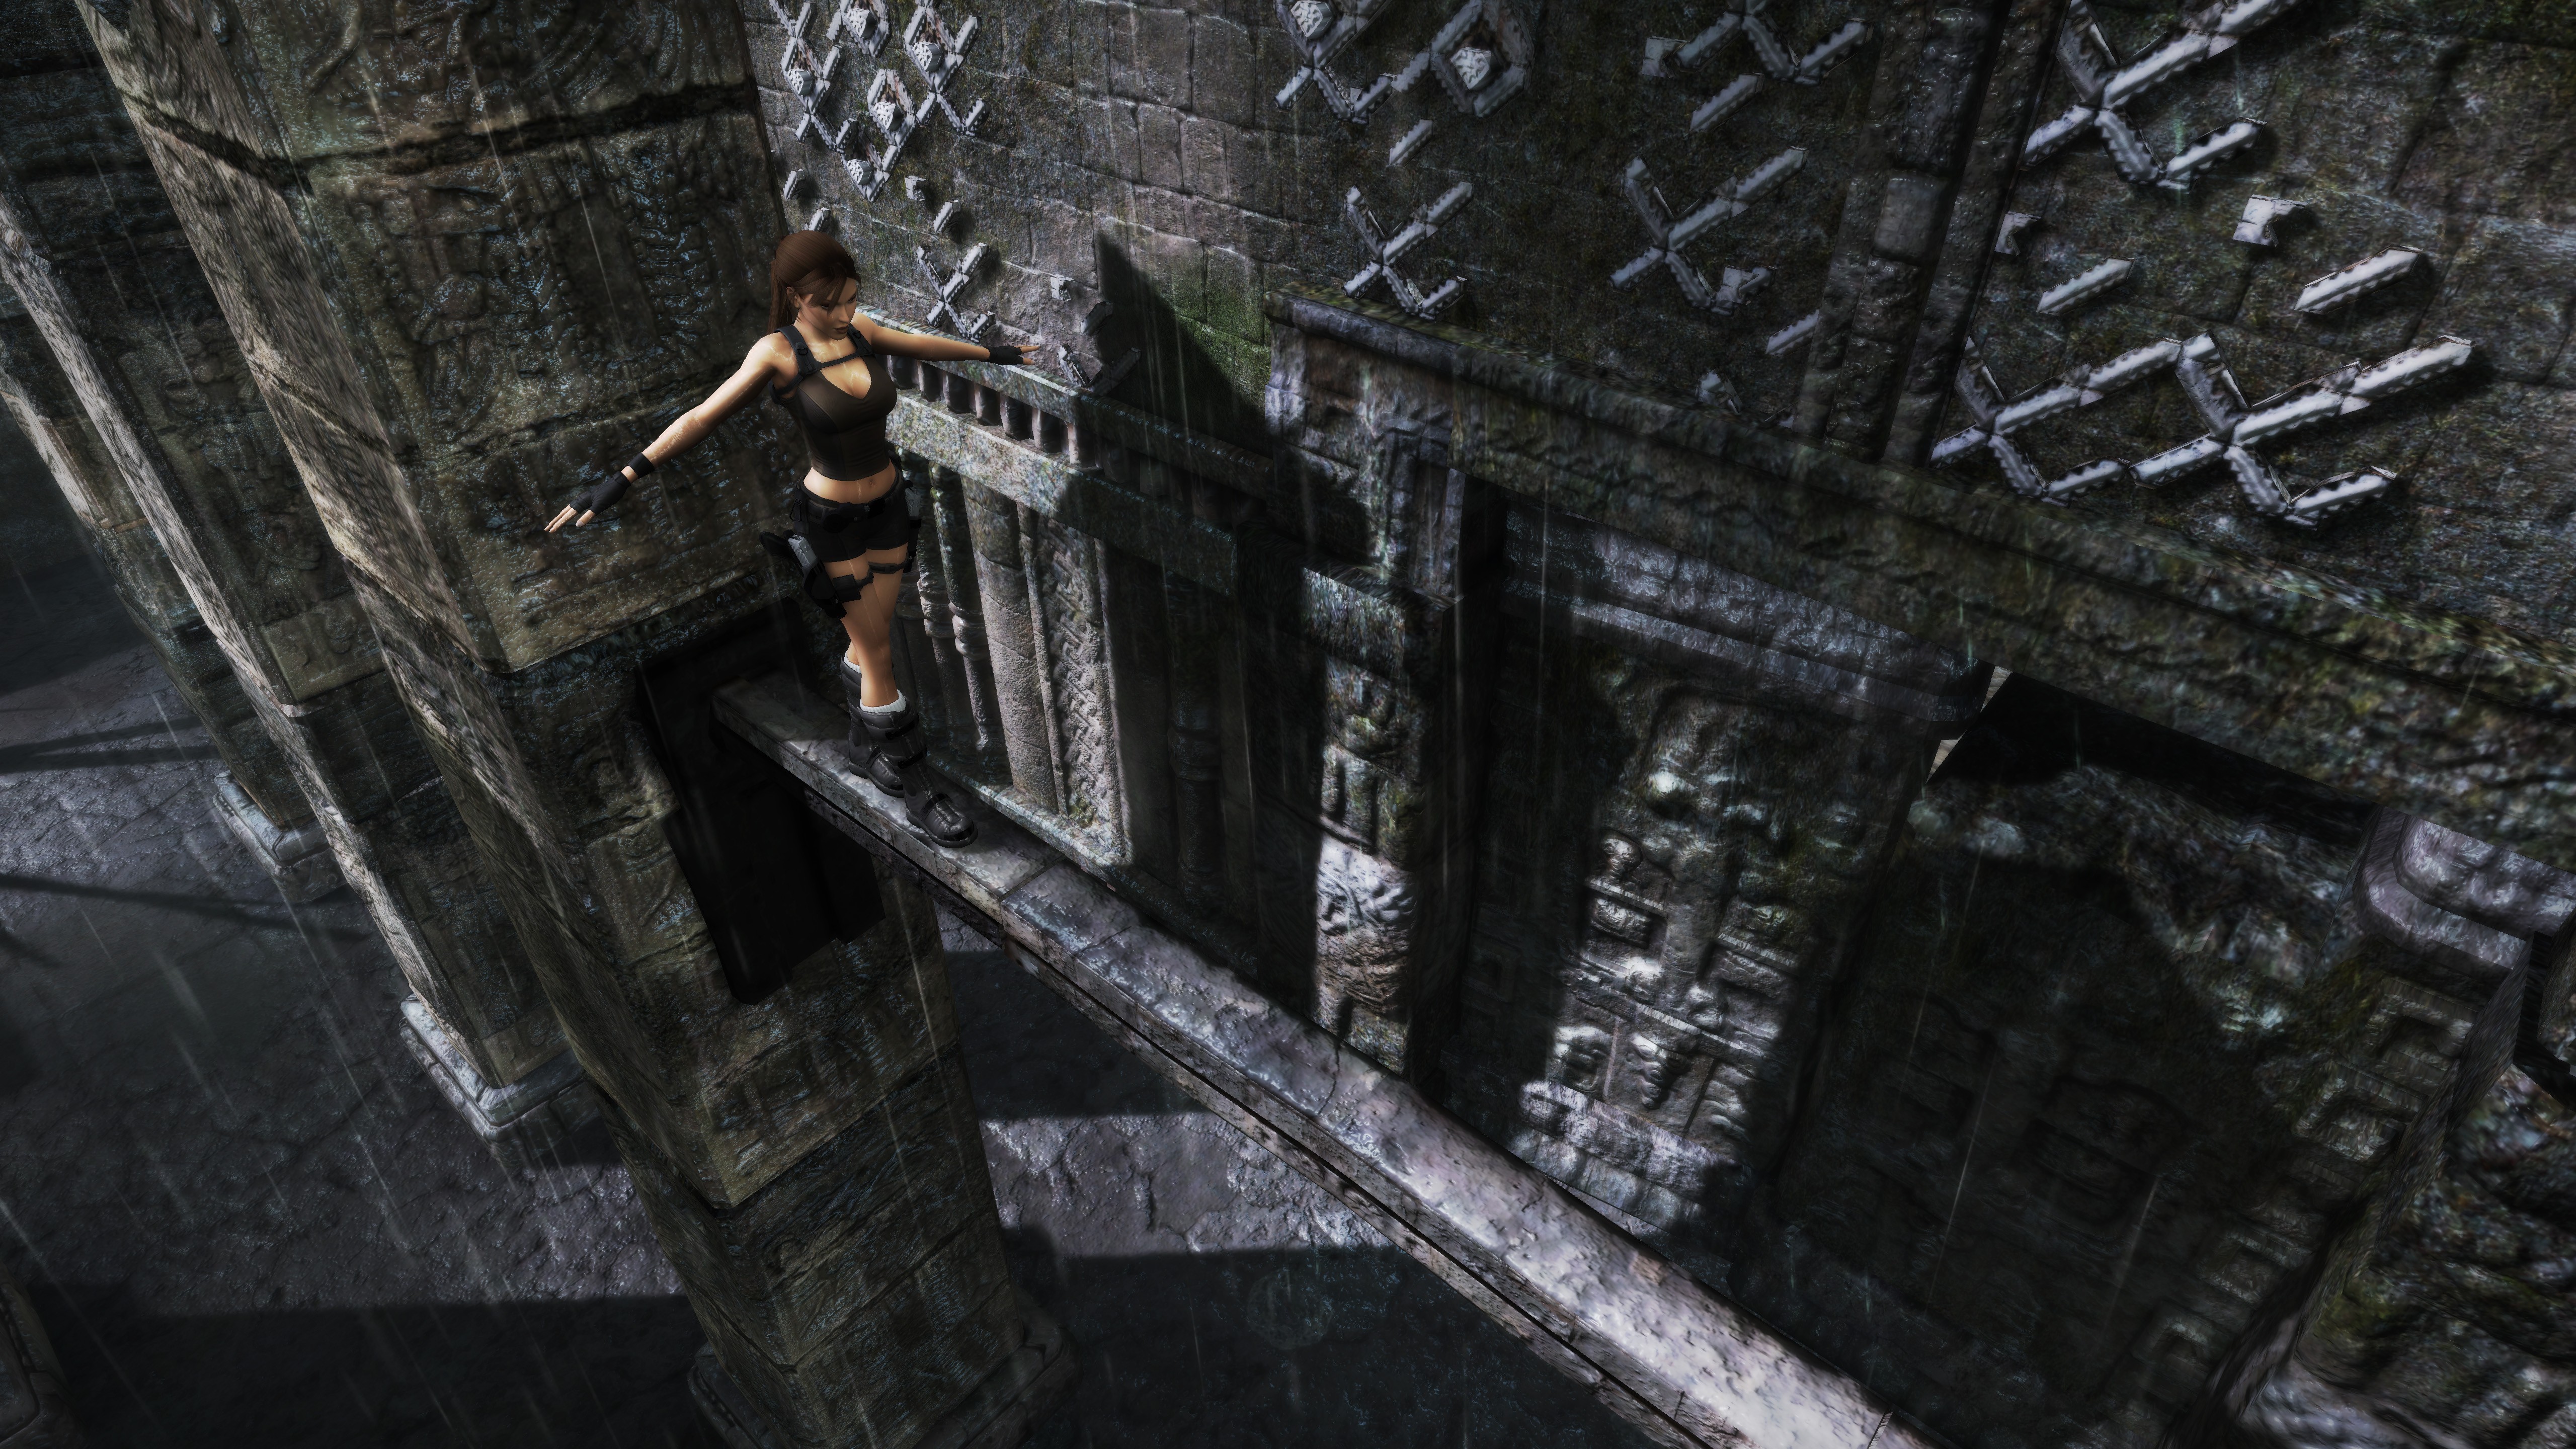 Media asset in full size related to 3dfxzone.it news item entitled as follows: Tomb Raider Underworld, Eidos pubblica 11 nuovi screenshots | Image Name: news6742_6.jpg